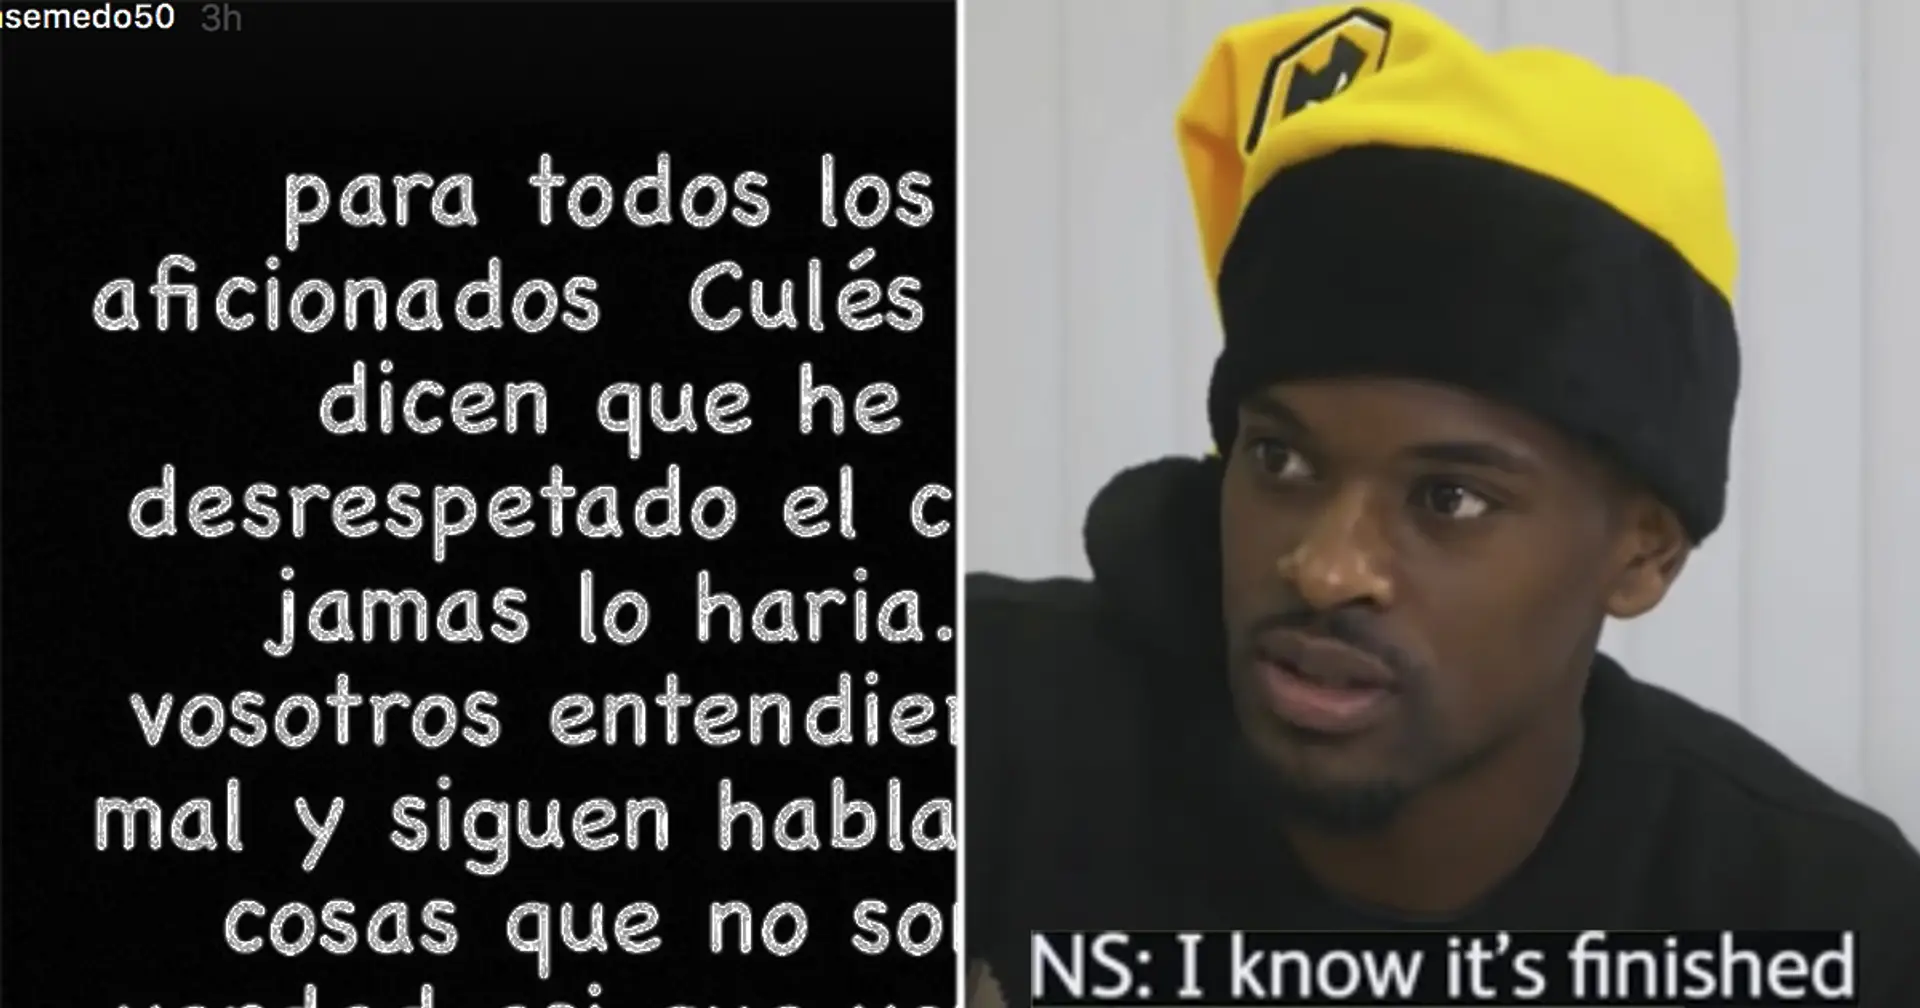 Semedo calls Barca 'finished' club in Wolves' official footage, explains himself later